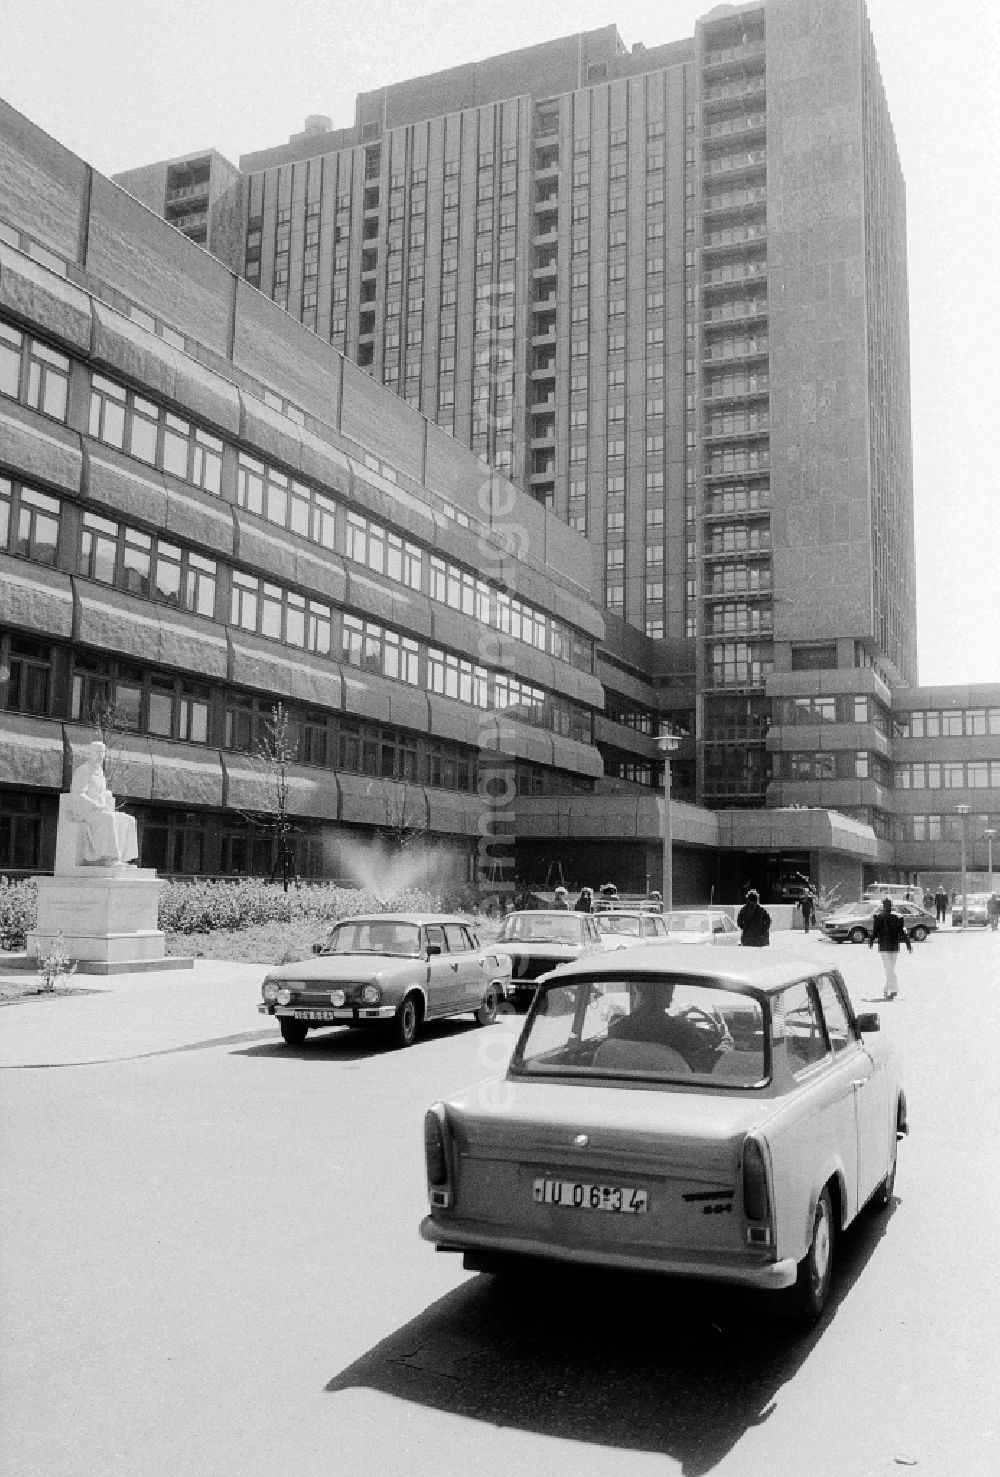 GDR image archive: Berlin - The bed high rise and the rescue place of the Charite in the campus middle in Luisenstrasse in Berlin, the former capital of the GDR, German democratic republic